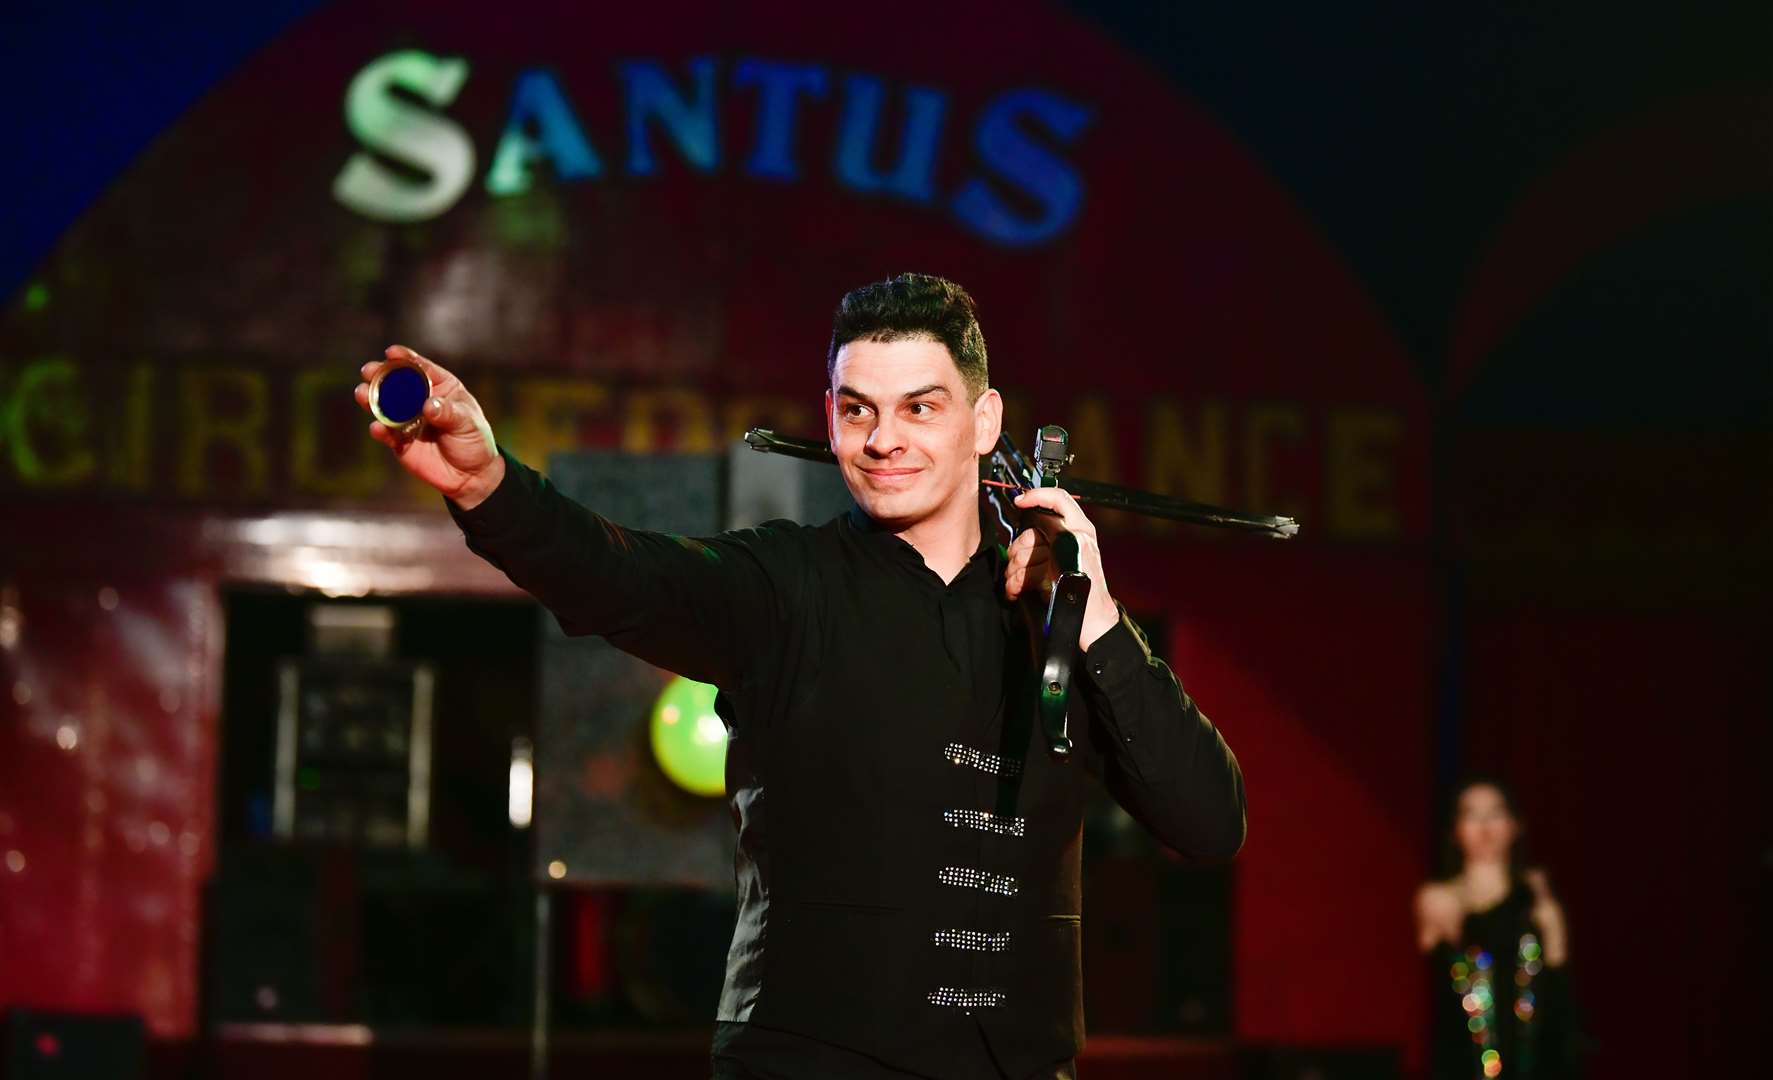 Sergio Silva and crossbow at Santus Circus. Picture: Andy Payne